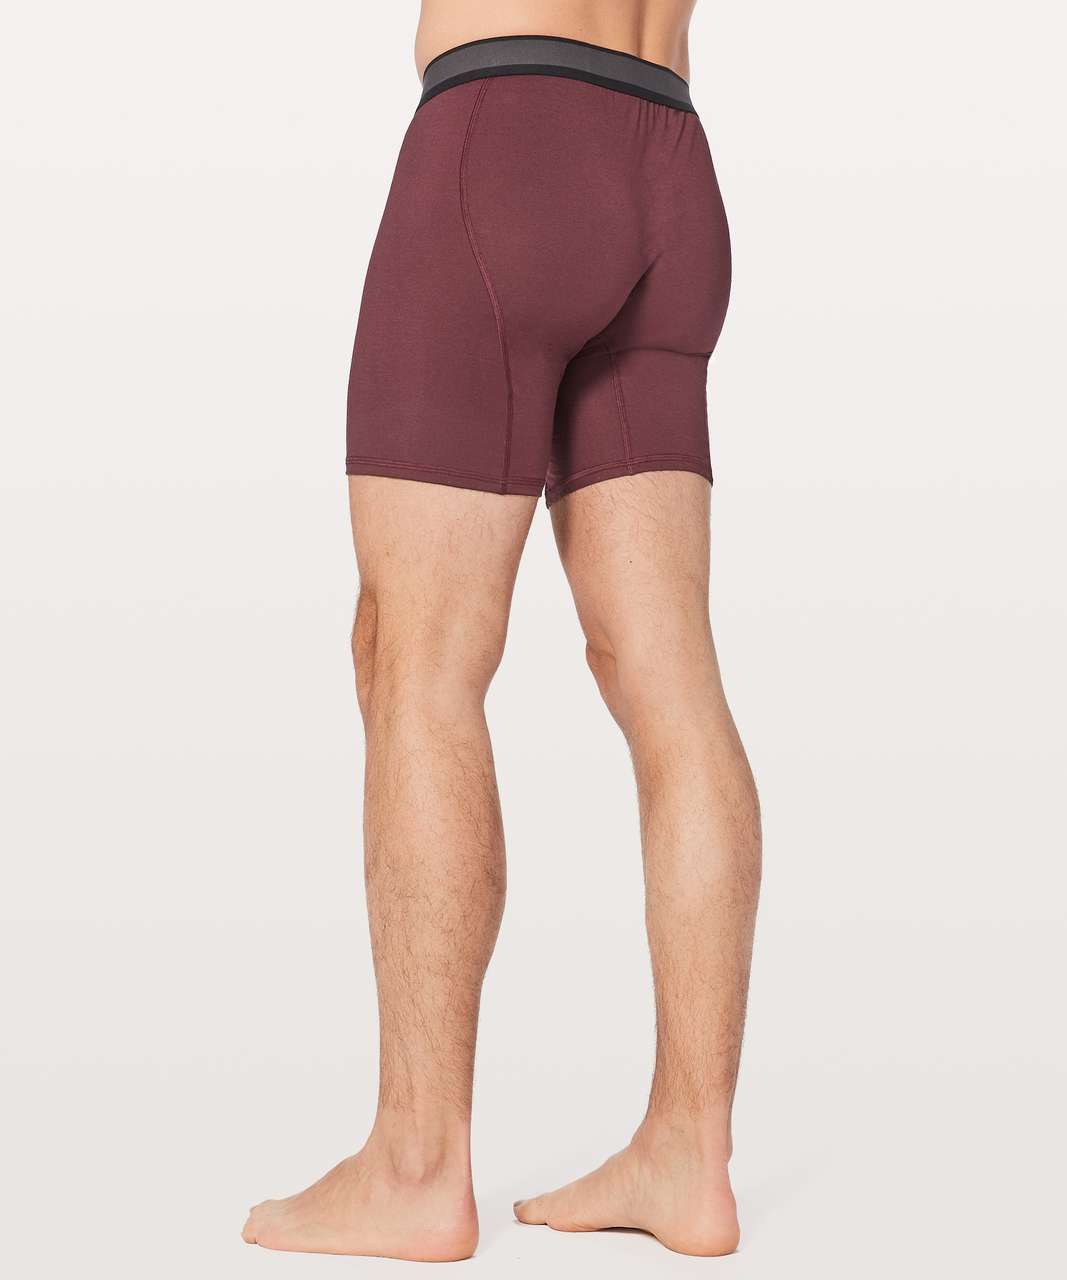 Lululemon No Boxer Boxer (The Long One) 7.5" - Cassis